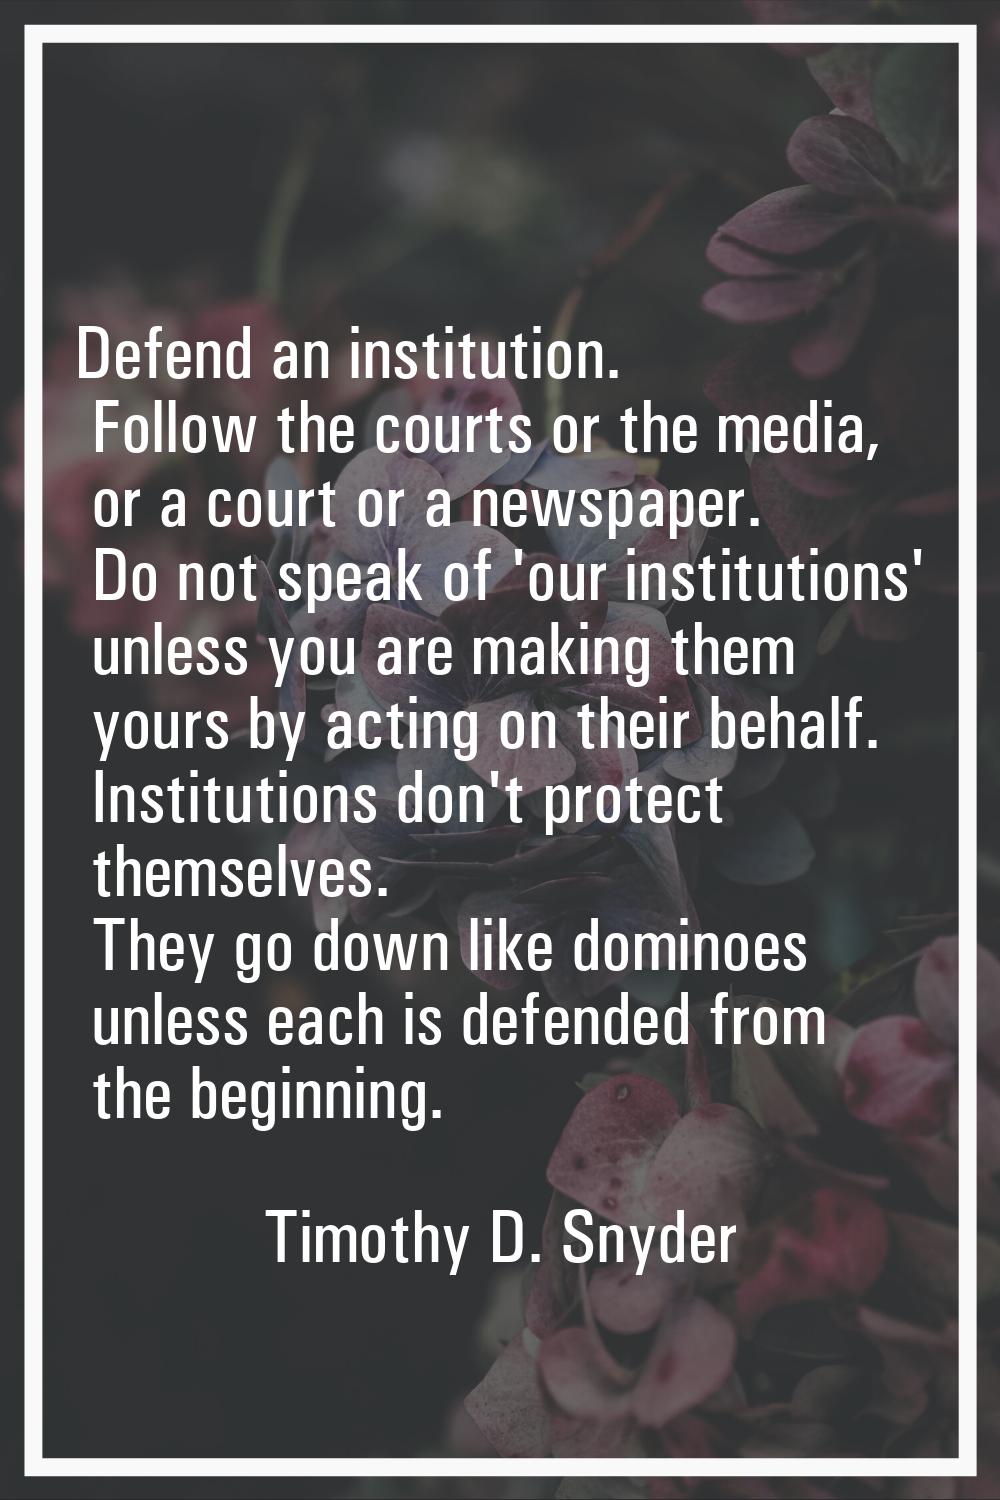 Defend an institution. Follow the courts or the media, or a court or a newspaper. Do not speak of '